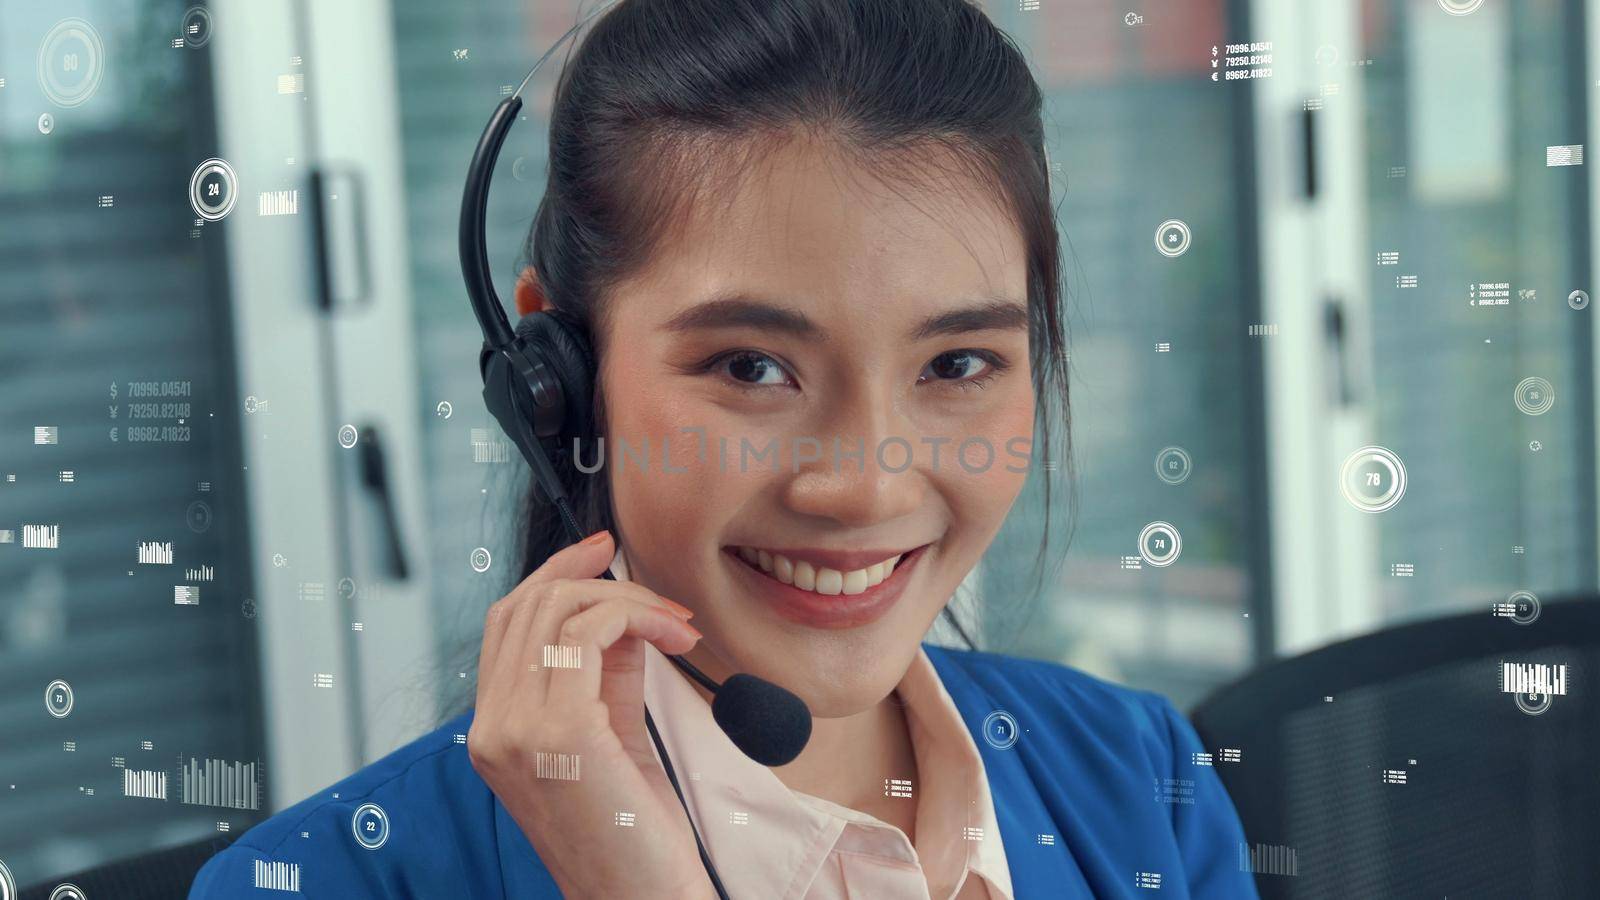 Customer support call center provide data with envisional graphic by biancoblue